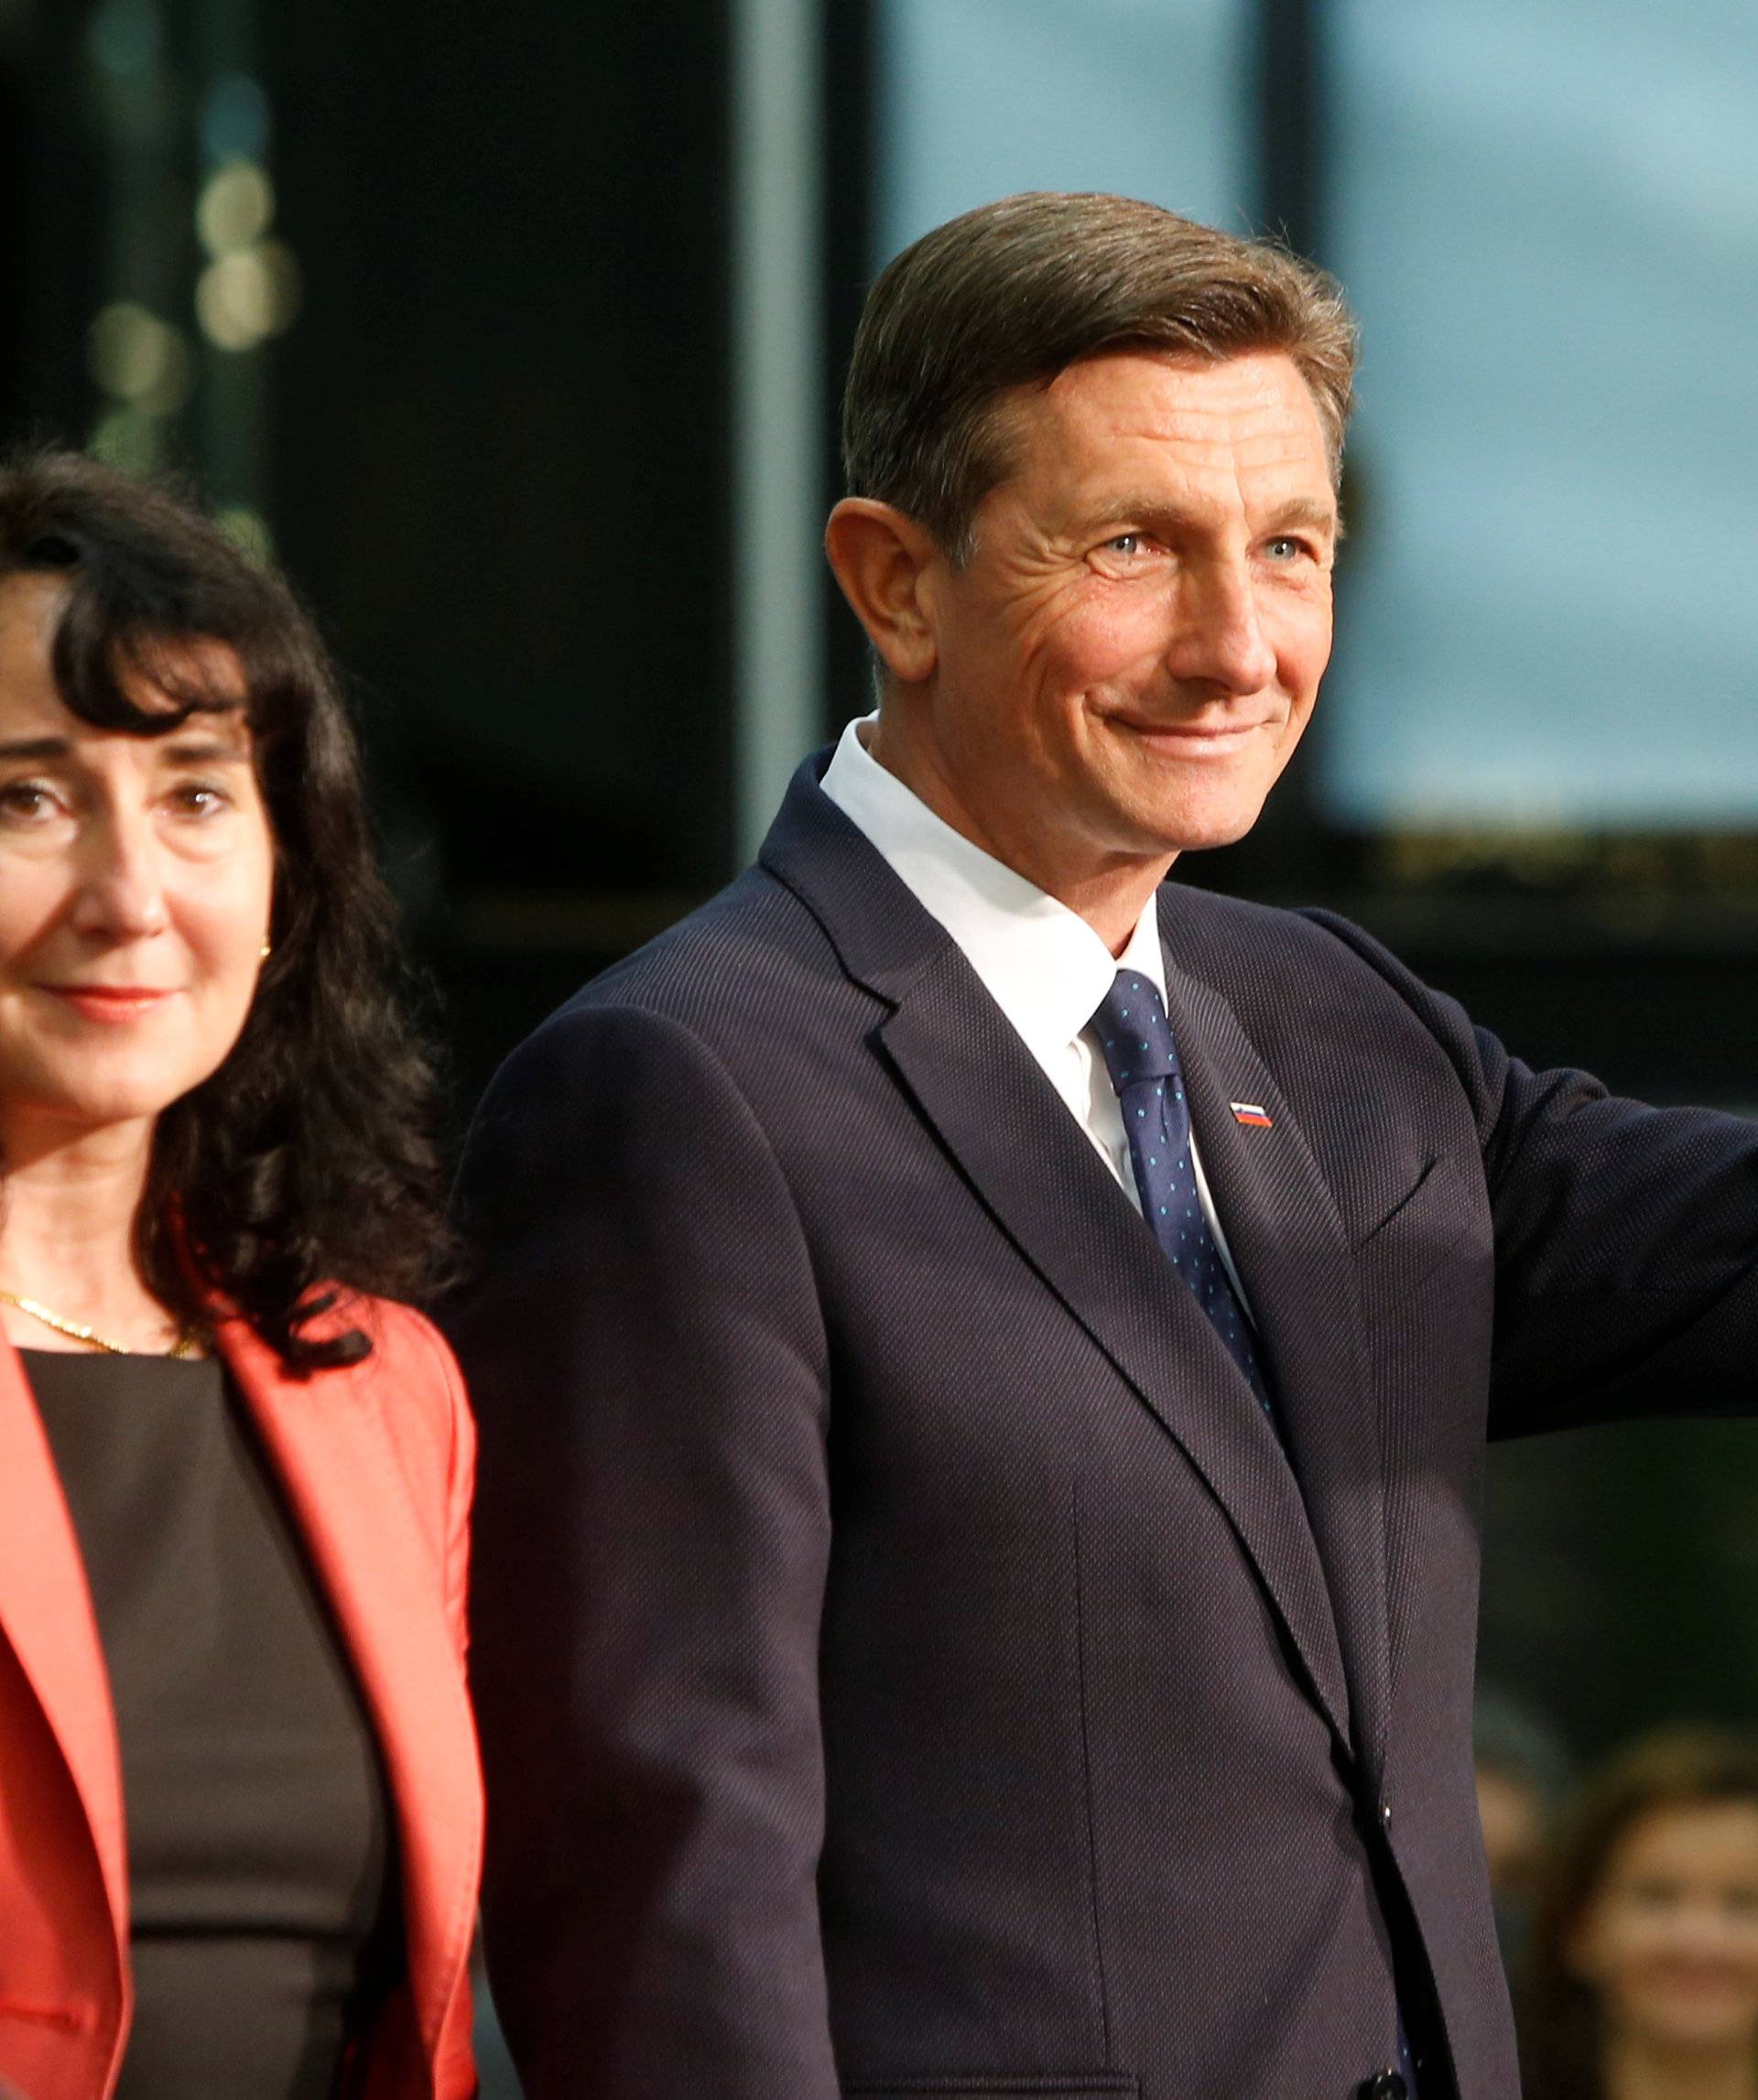 Current President and presidential candidate Borut Pahor and his wife Tanja Pecar react after first results of the second round of the presidential elections in Ljubljana